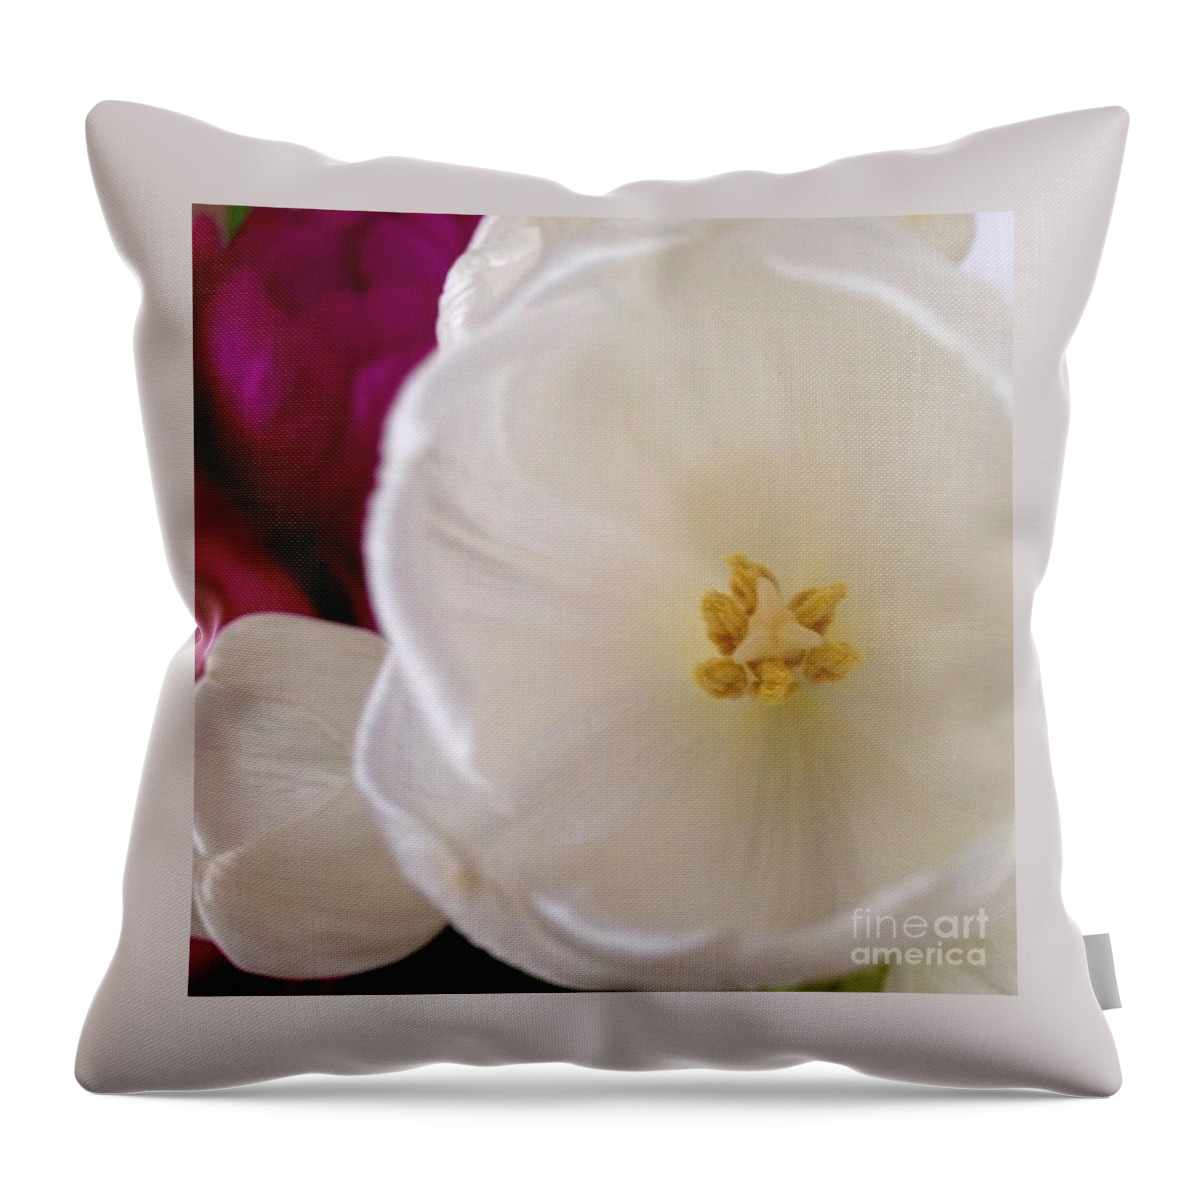 Flowers Throw Pillow featuring the photograph Friendship by Denise Railey